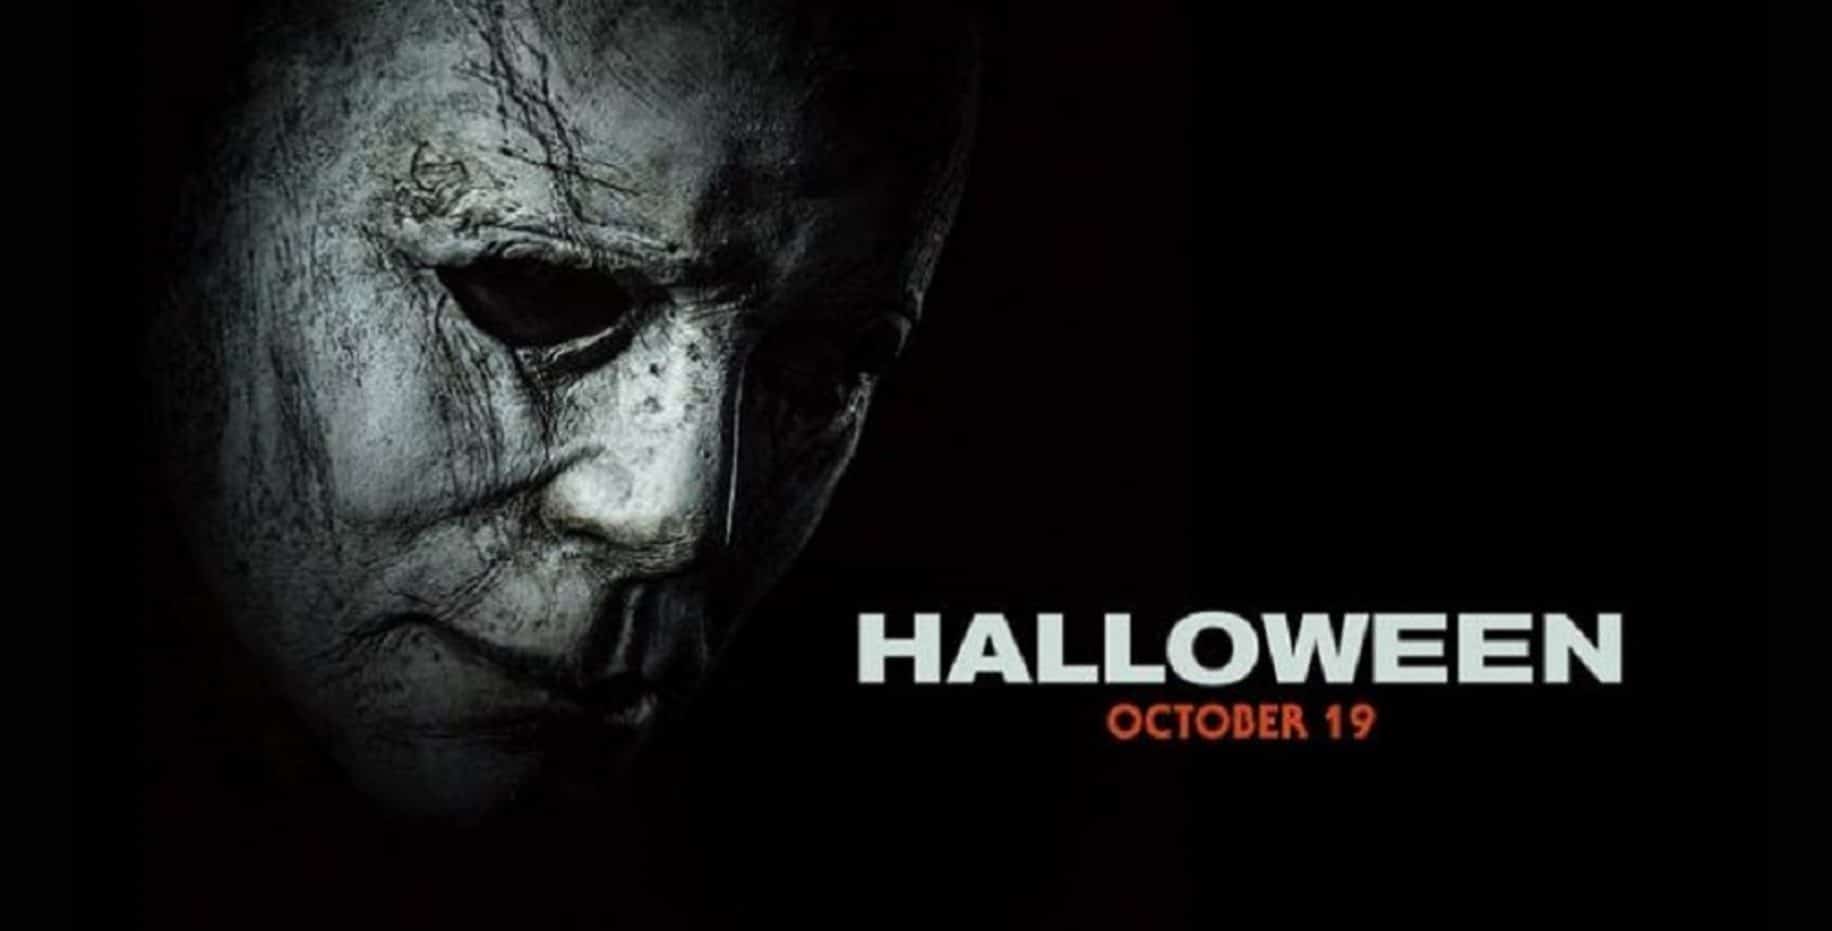 Halloween 2018 is set to hit theaters on October 19, 2018